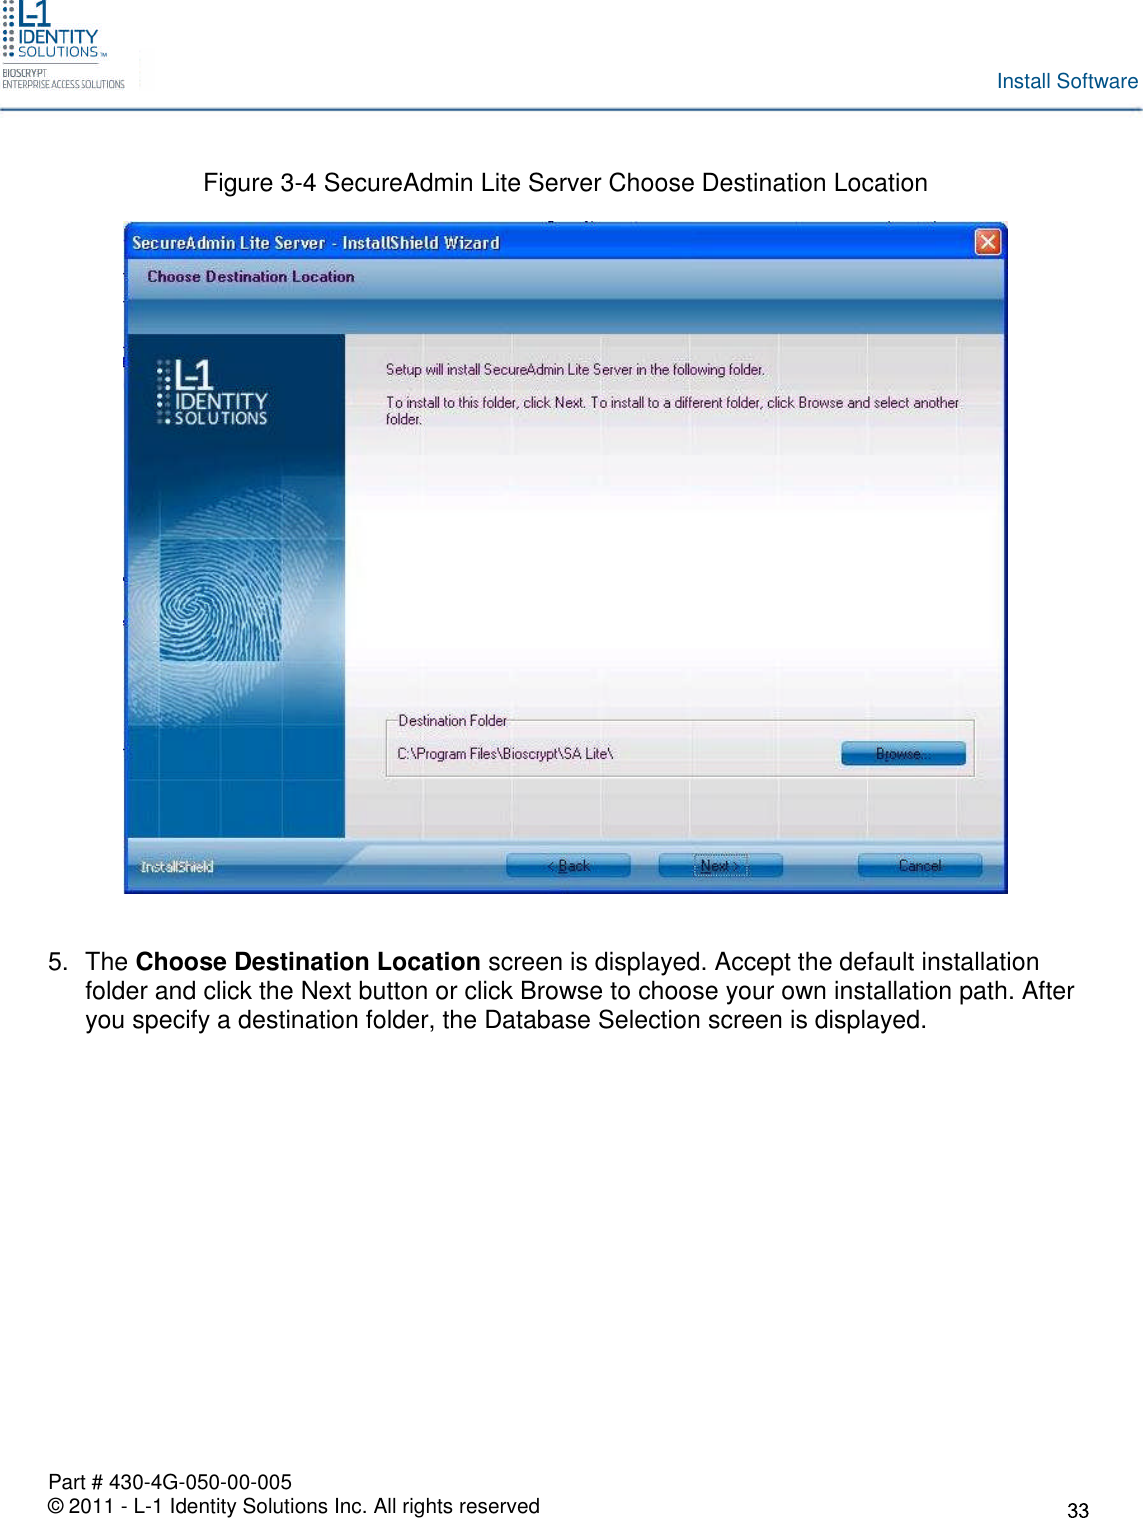 Part # 430-4G-050-00-005© 2011 - L-1 Identity Solutions Inc. All rights reservedInstall SoftwareFigure 3-4 SecureAdmin Lite Server Choose Destination Location5. The Choose Destination Location screen is displayed. Accept the default installationfolder and click the Next button or click Browse to choose your own installation path. Afteryou specify a destination folder, the Database Selection screen is displayed.